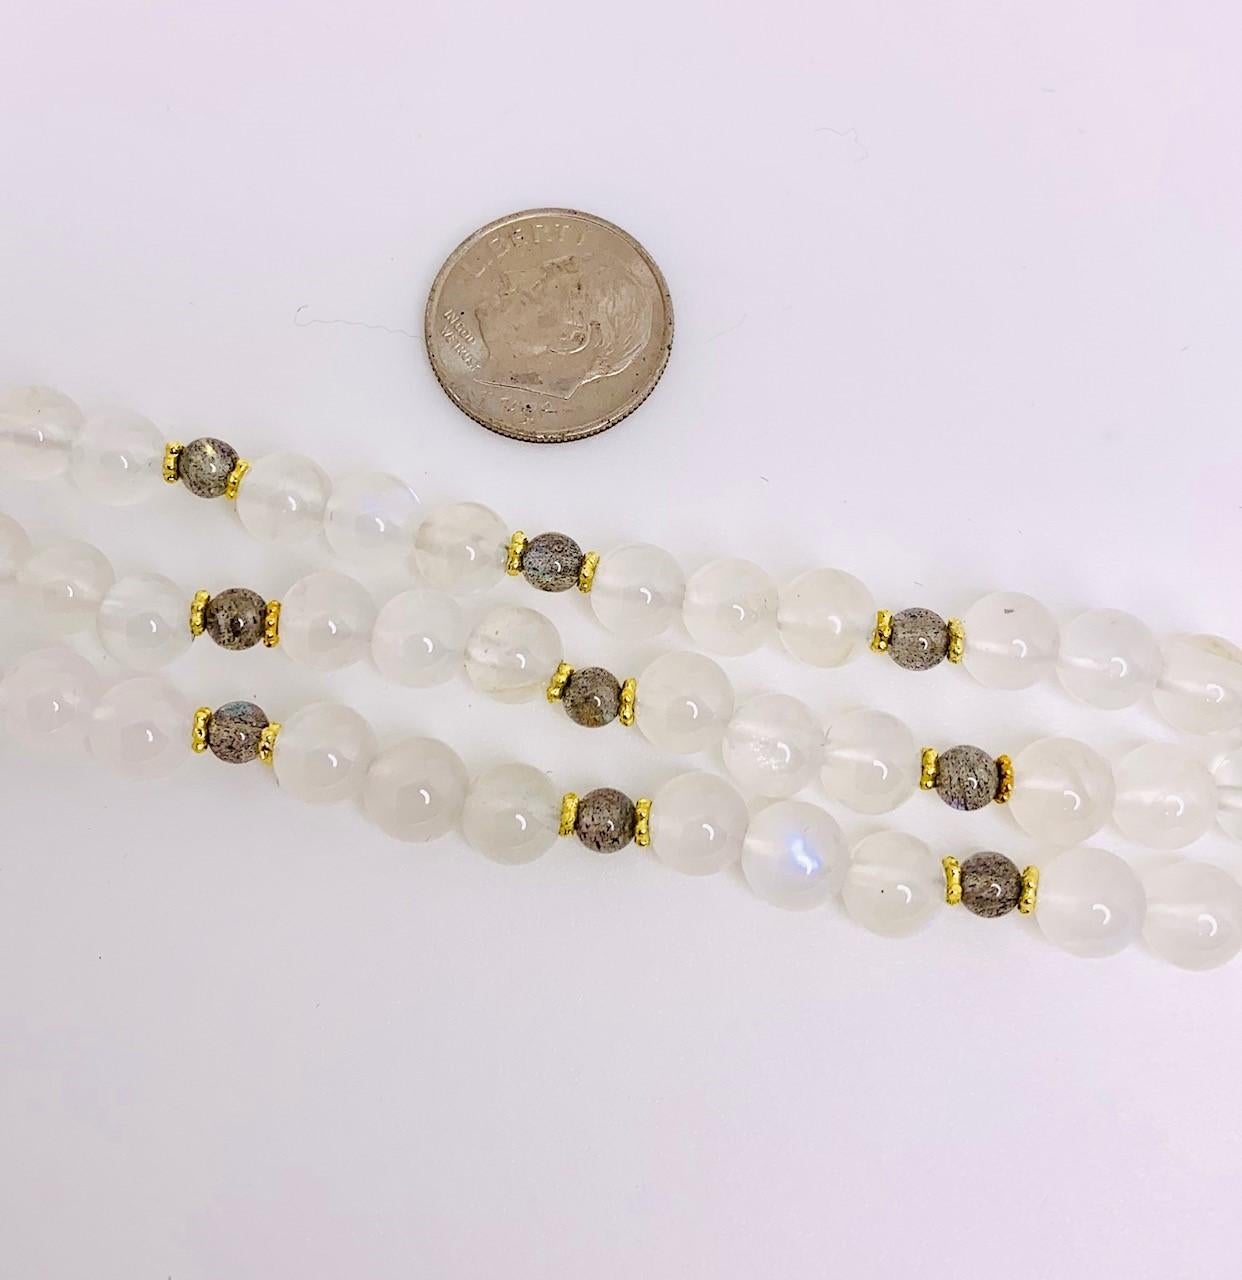 3-Strand Moonstone and Labradorite Beaded Necklace with 18k Yellow Gold Accents For Sale 2